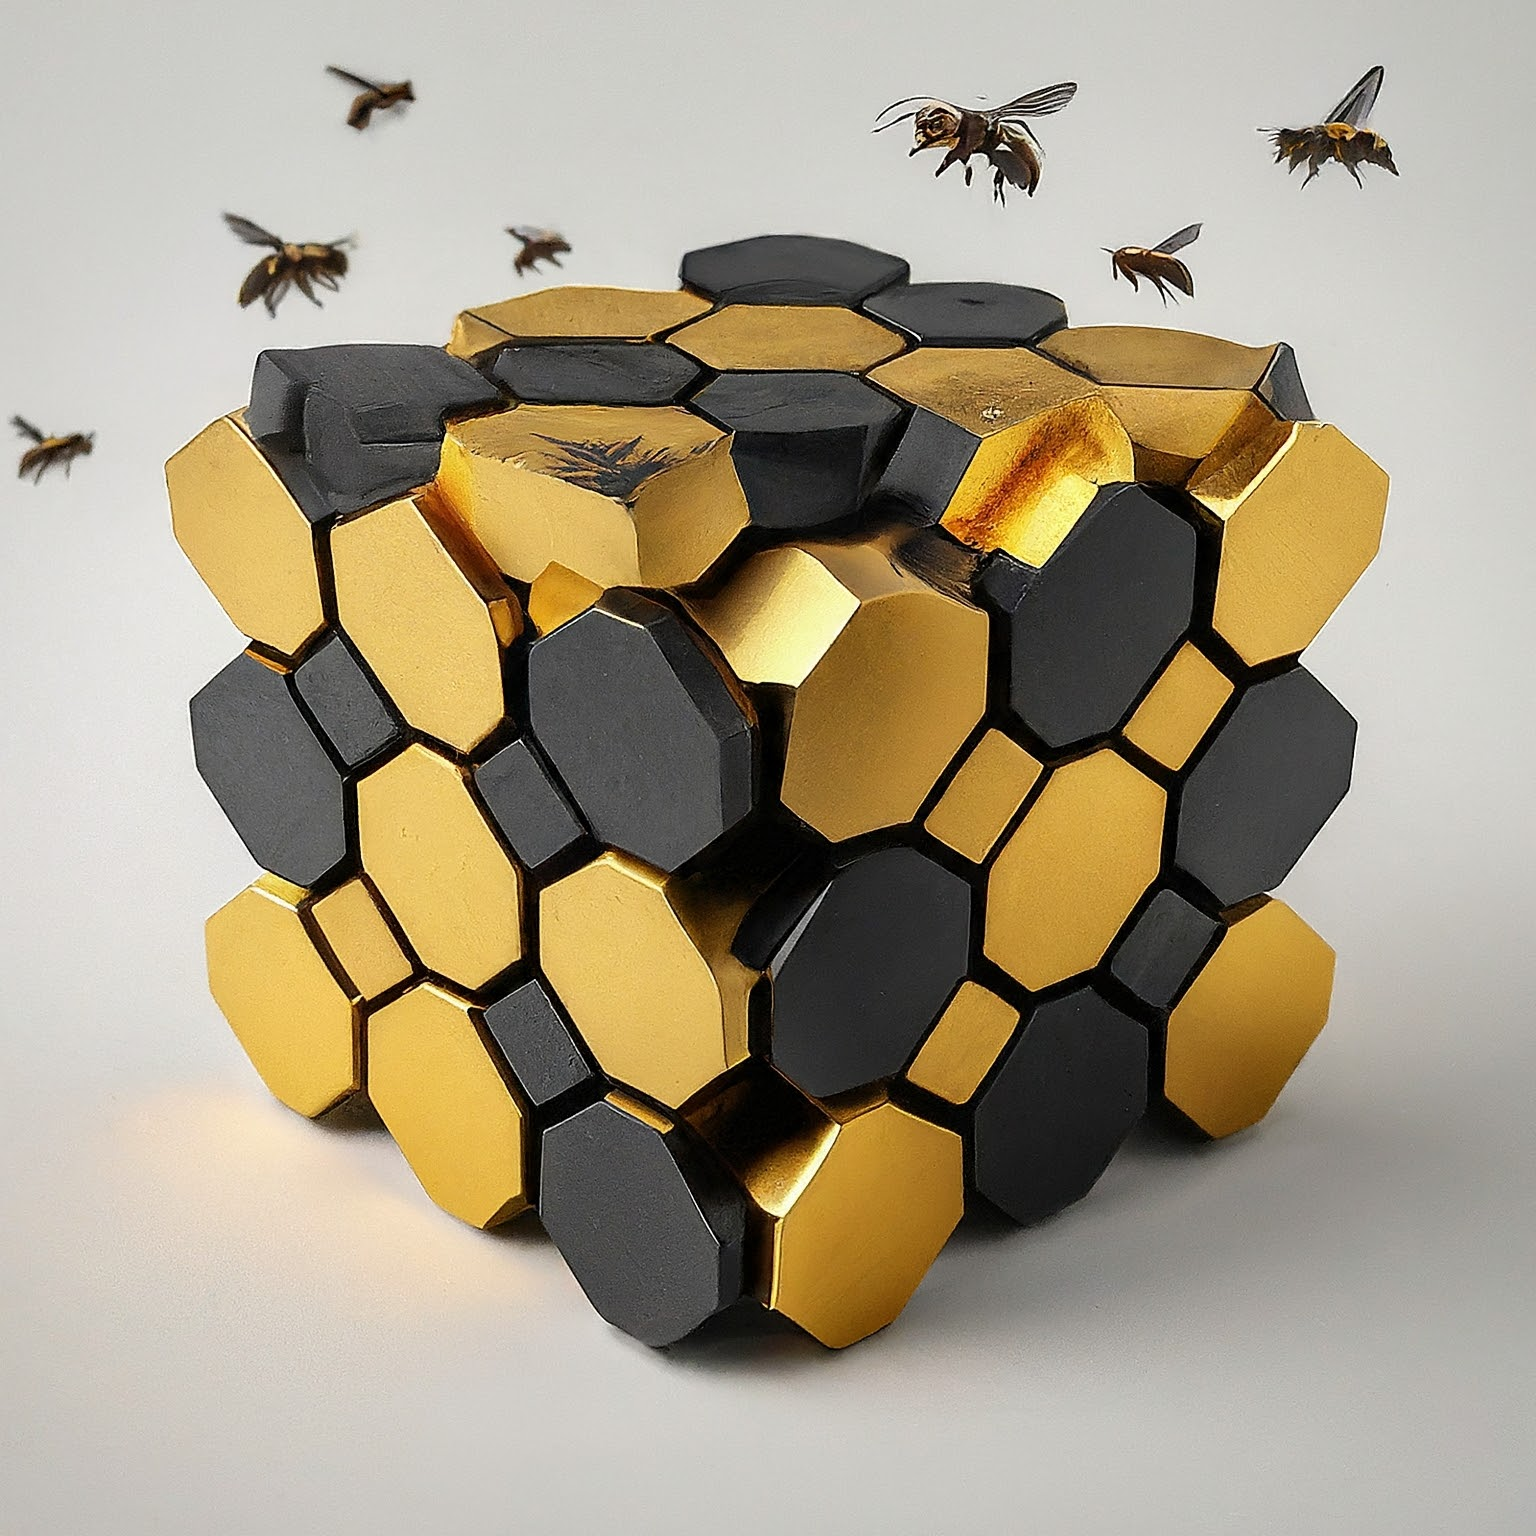 A 3D honeycomb shaped like a Rubik's cube with a white background  with bees symbolizing the Cyber Bee interaction for effective model development.